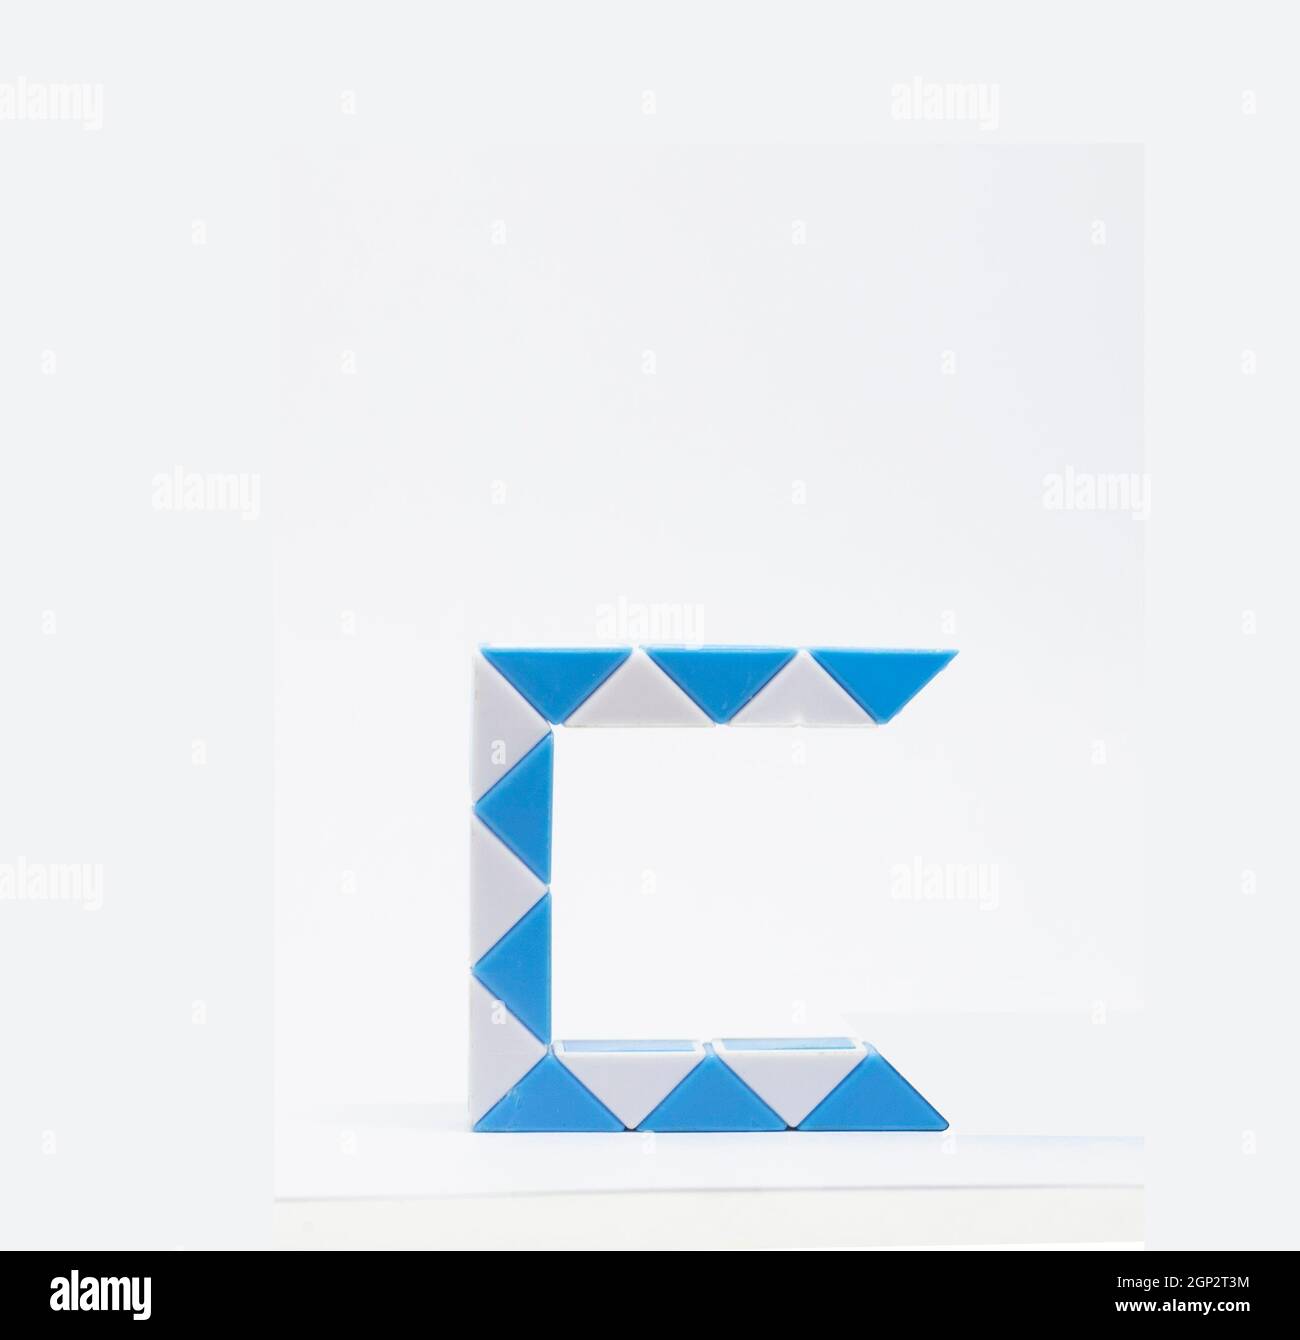 Letter 'c' made of blue and white triangles on a white background. Stock Photo